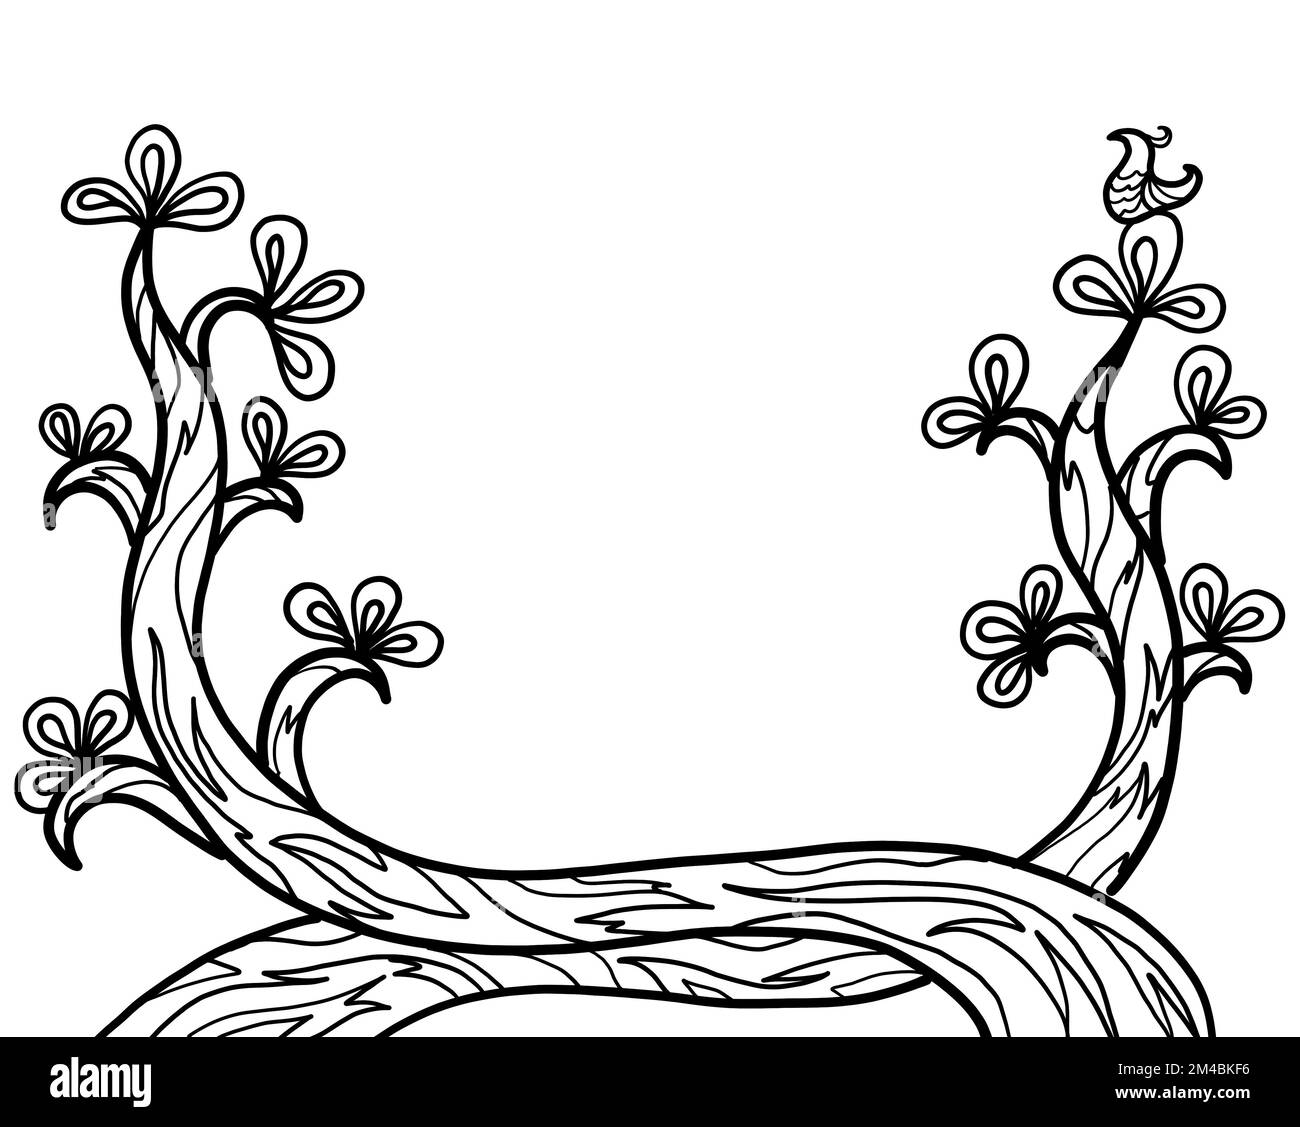 Illustration black outline drawing of tree plant nature on white background with a copy space. Hand drawn, artistic design. Stock Photo